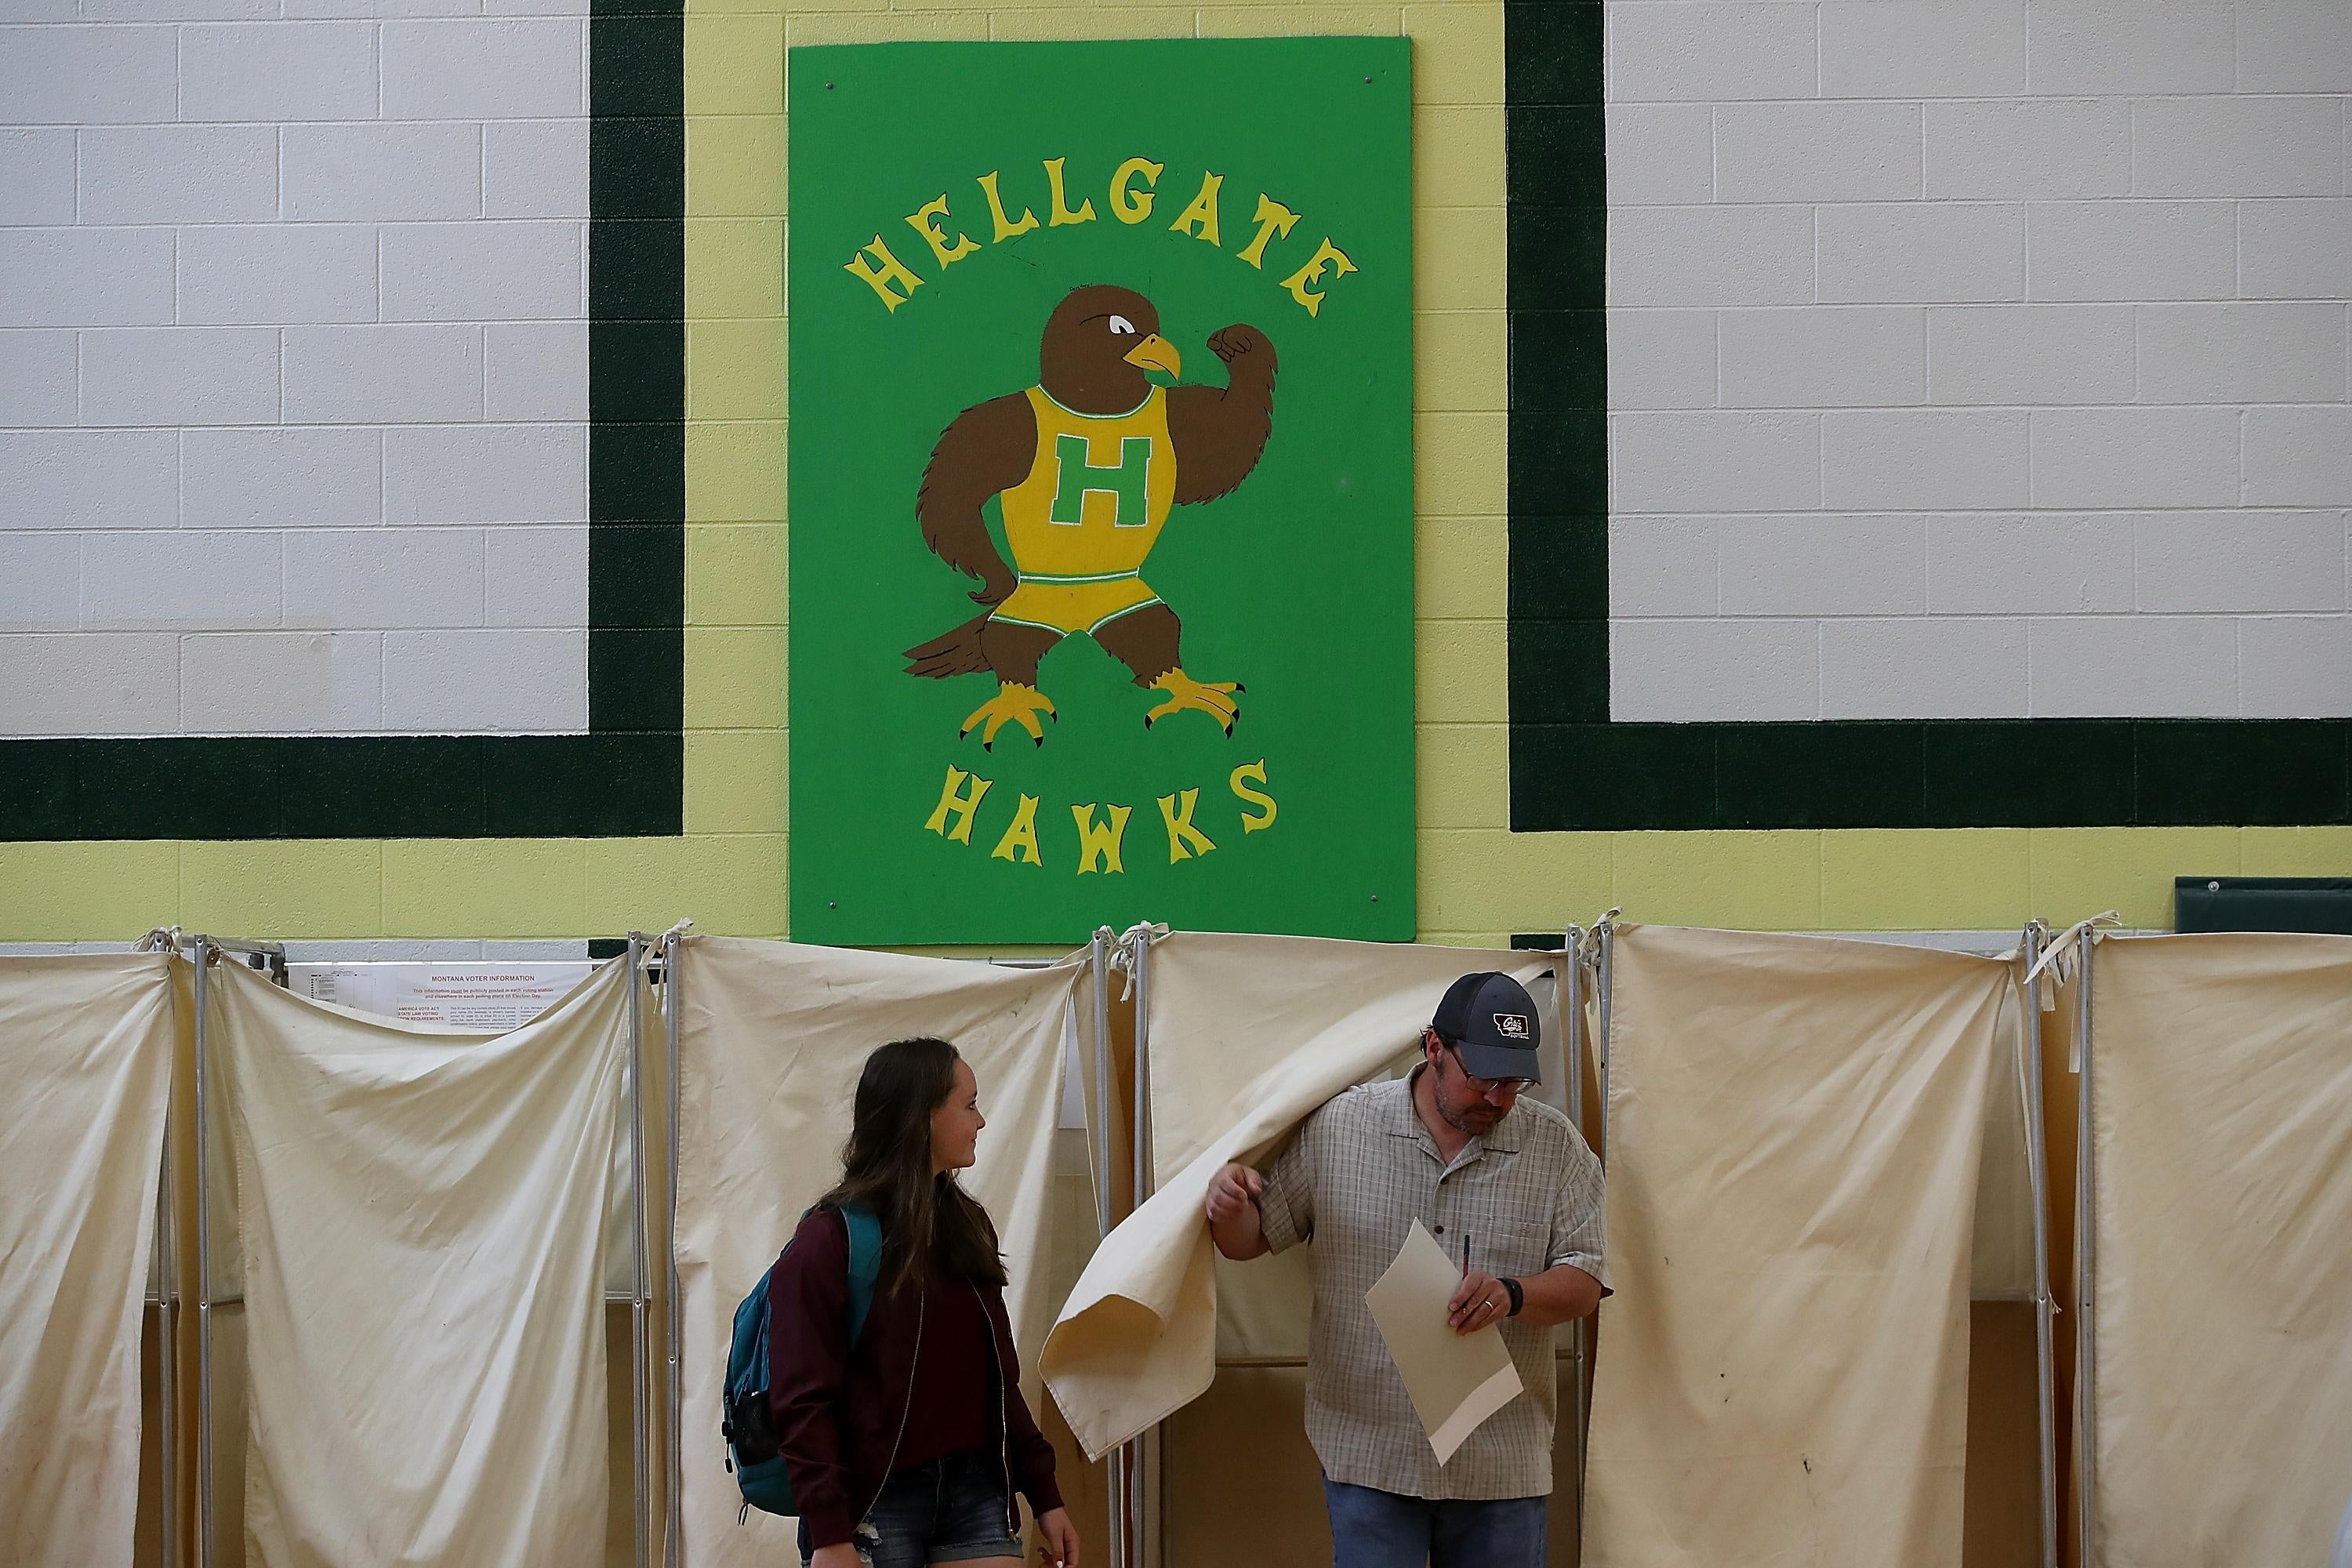  A voter exits a voting booth in a polling station at Hellgate Elementary School on May 25, 2017 in Missoula, Montana. 